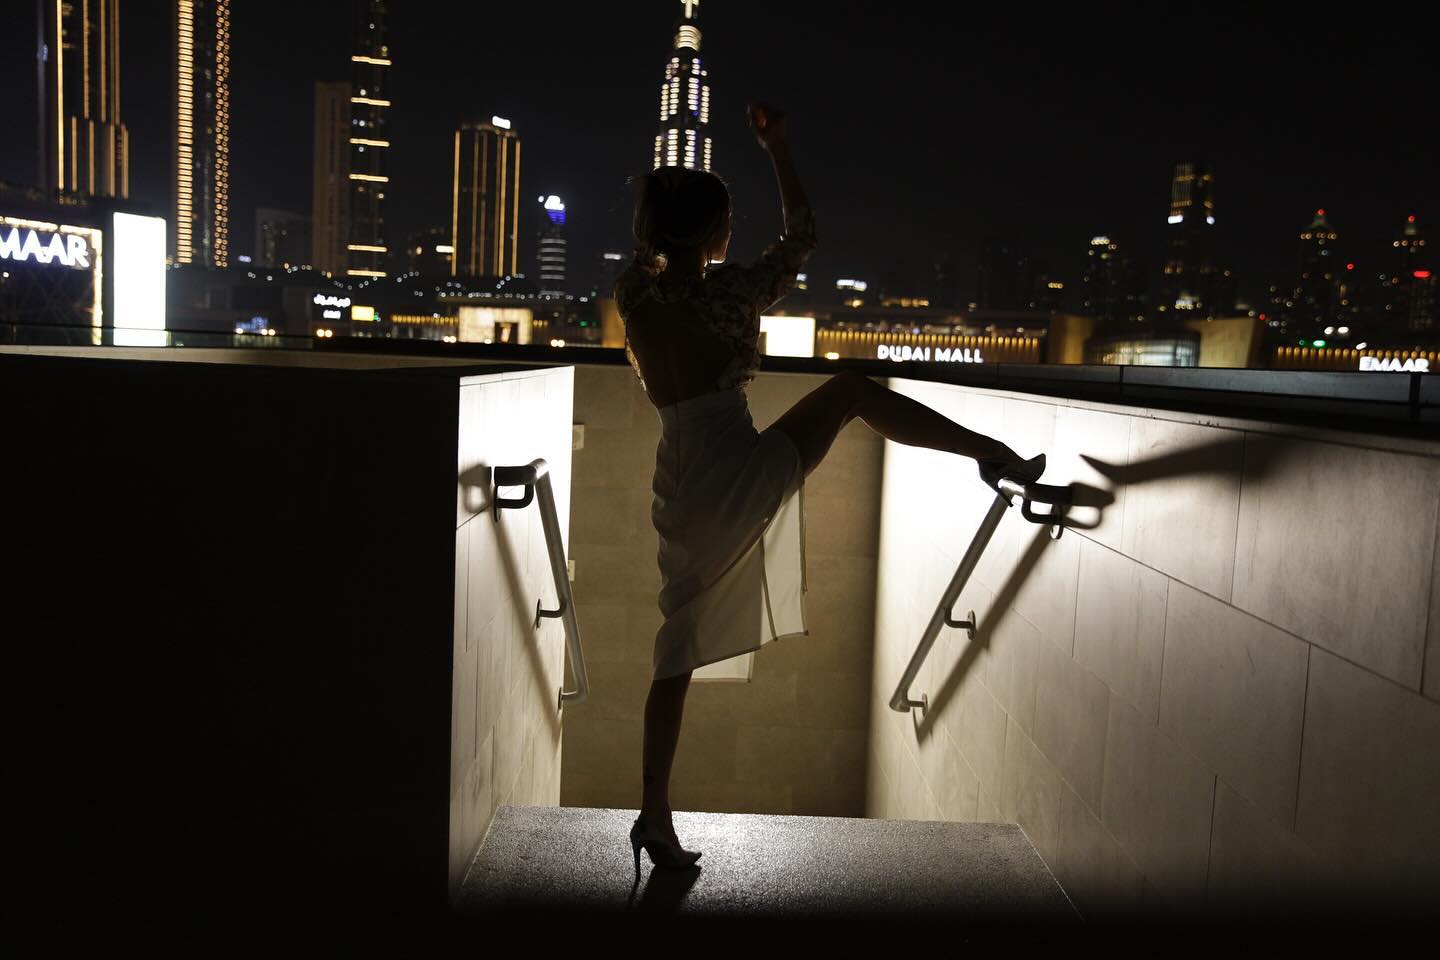 You can’t run from the shadow. 
But you can invite it to dance. 🪩 

#shadowphotography #shadowself #élégant #lady #ladyboss #ladylifestyle #diva👑 #dubailifestyle #dubailuxurylife #dubai❤️ #photographylover #ladyphotography #alphawoman